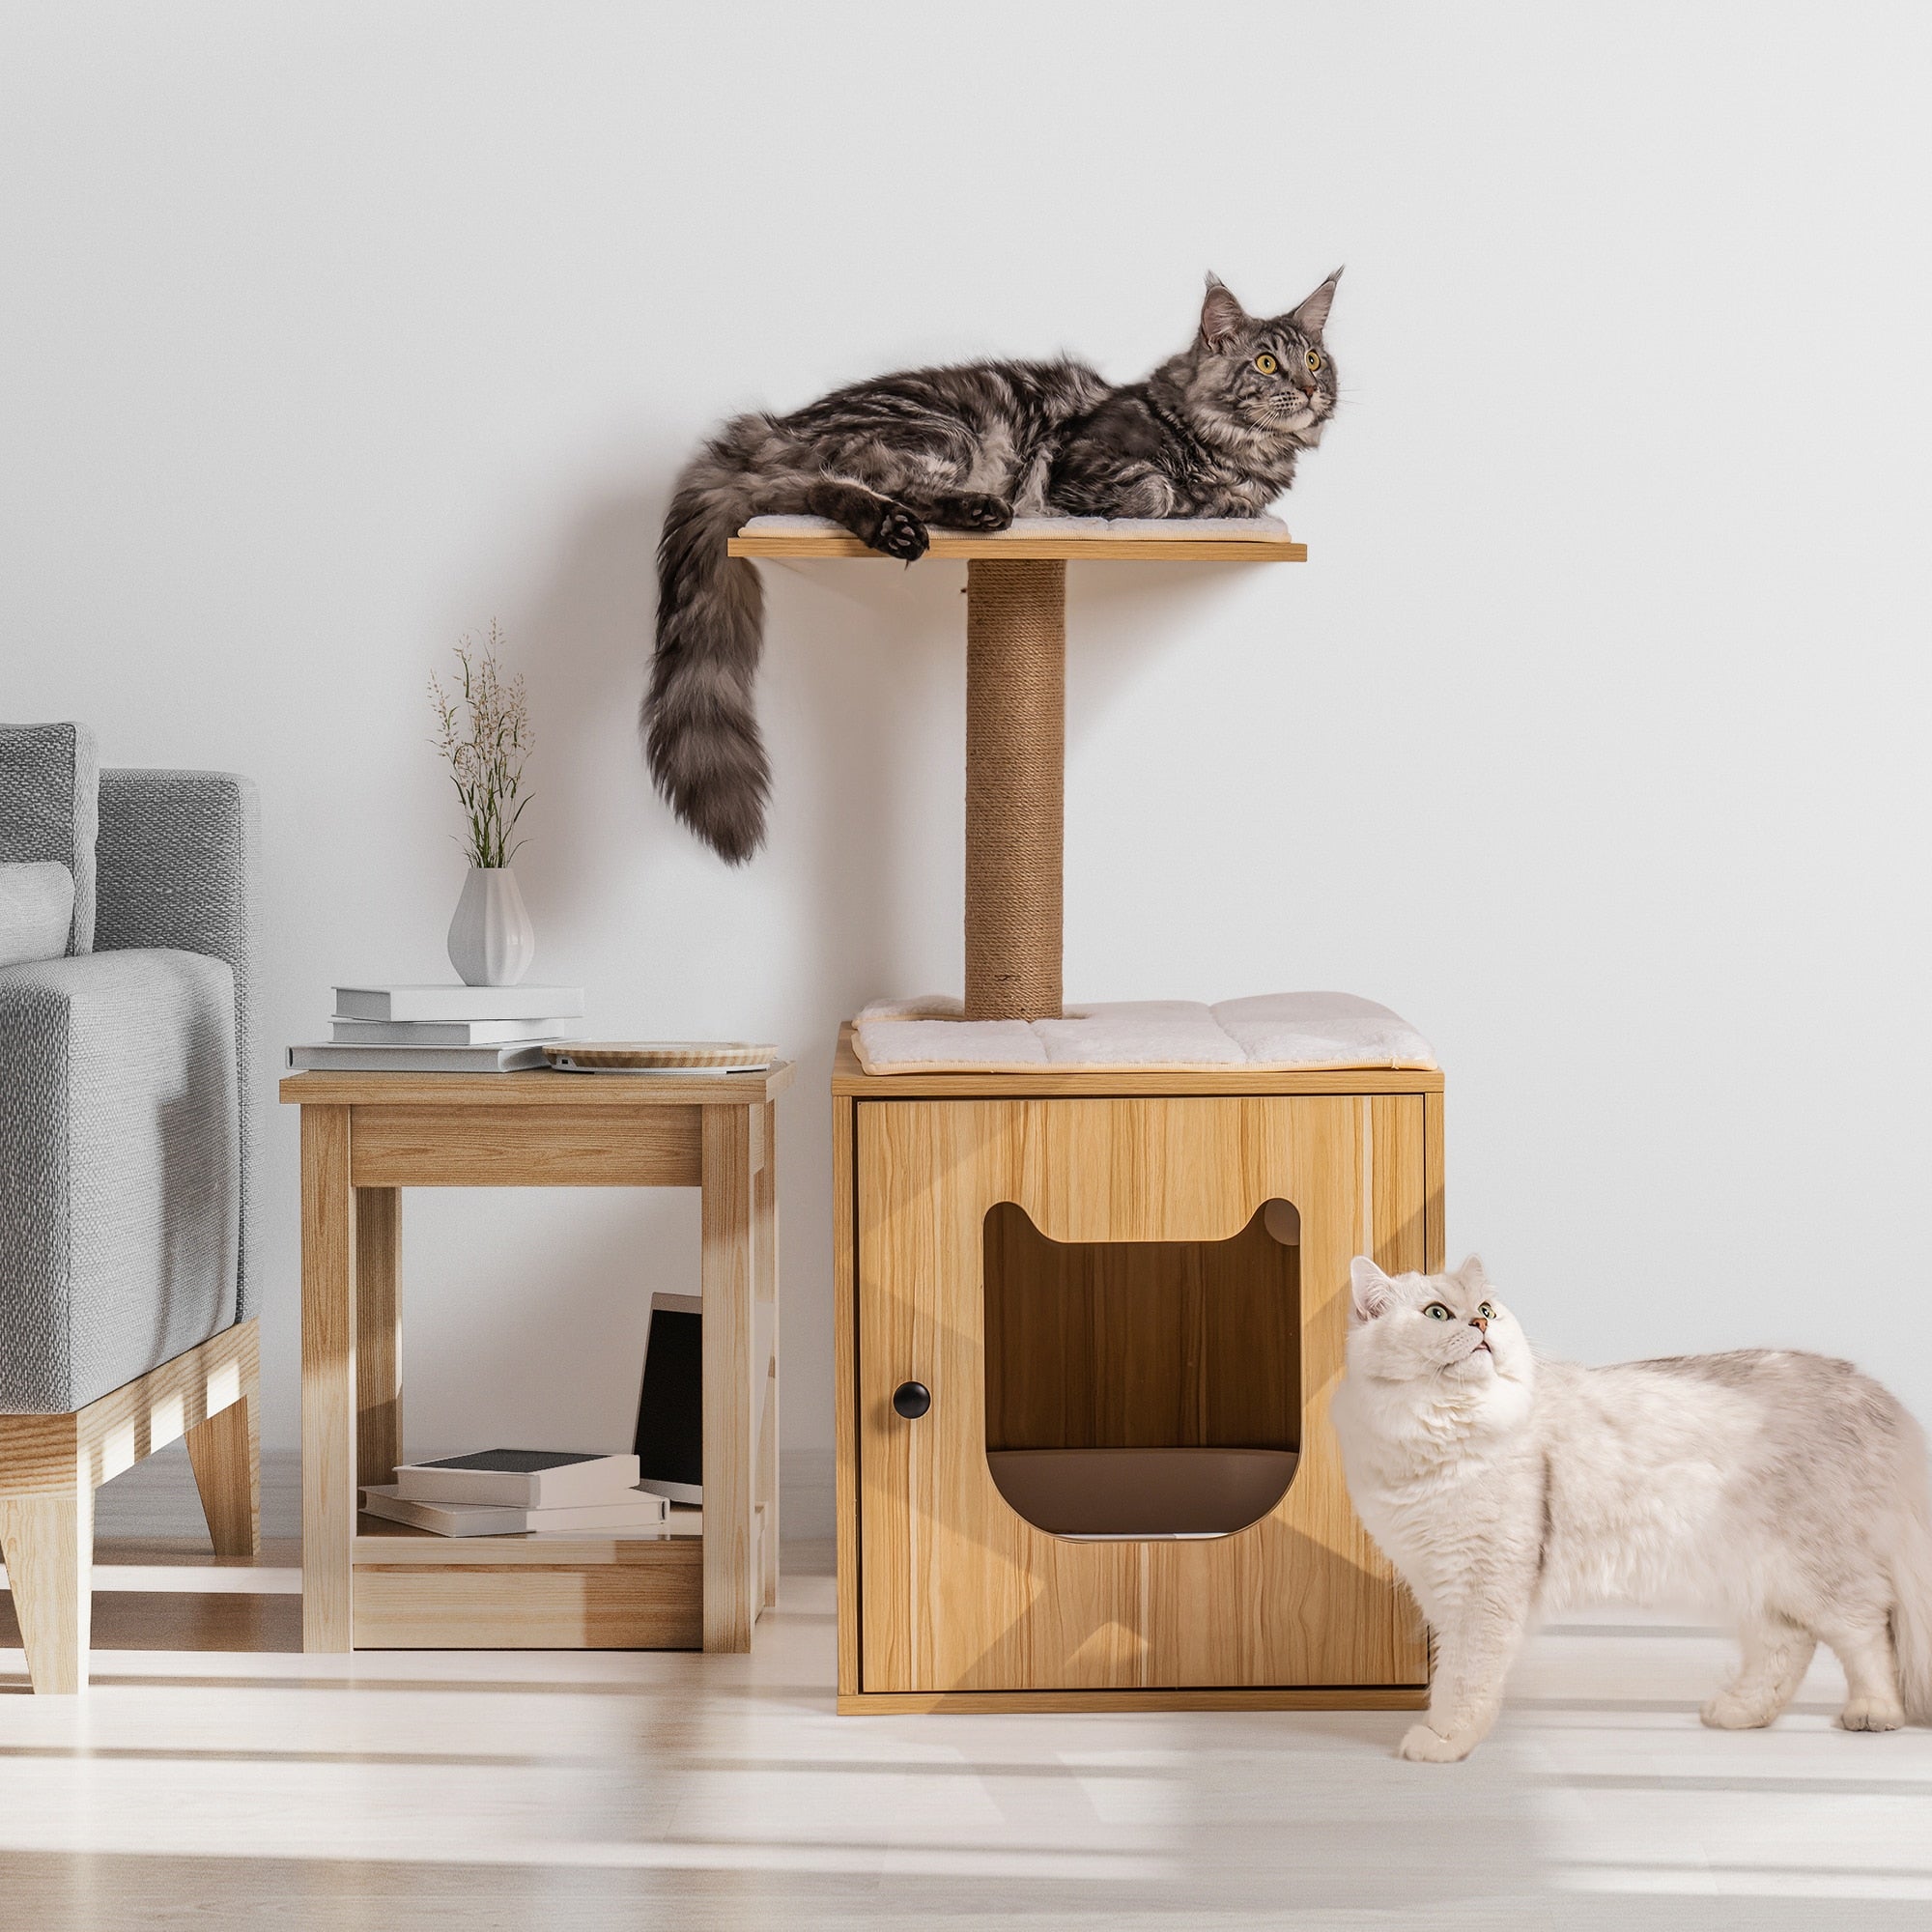 Wooden Cat House with bed